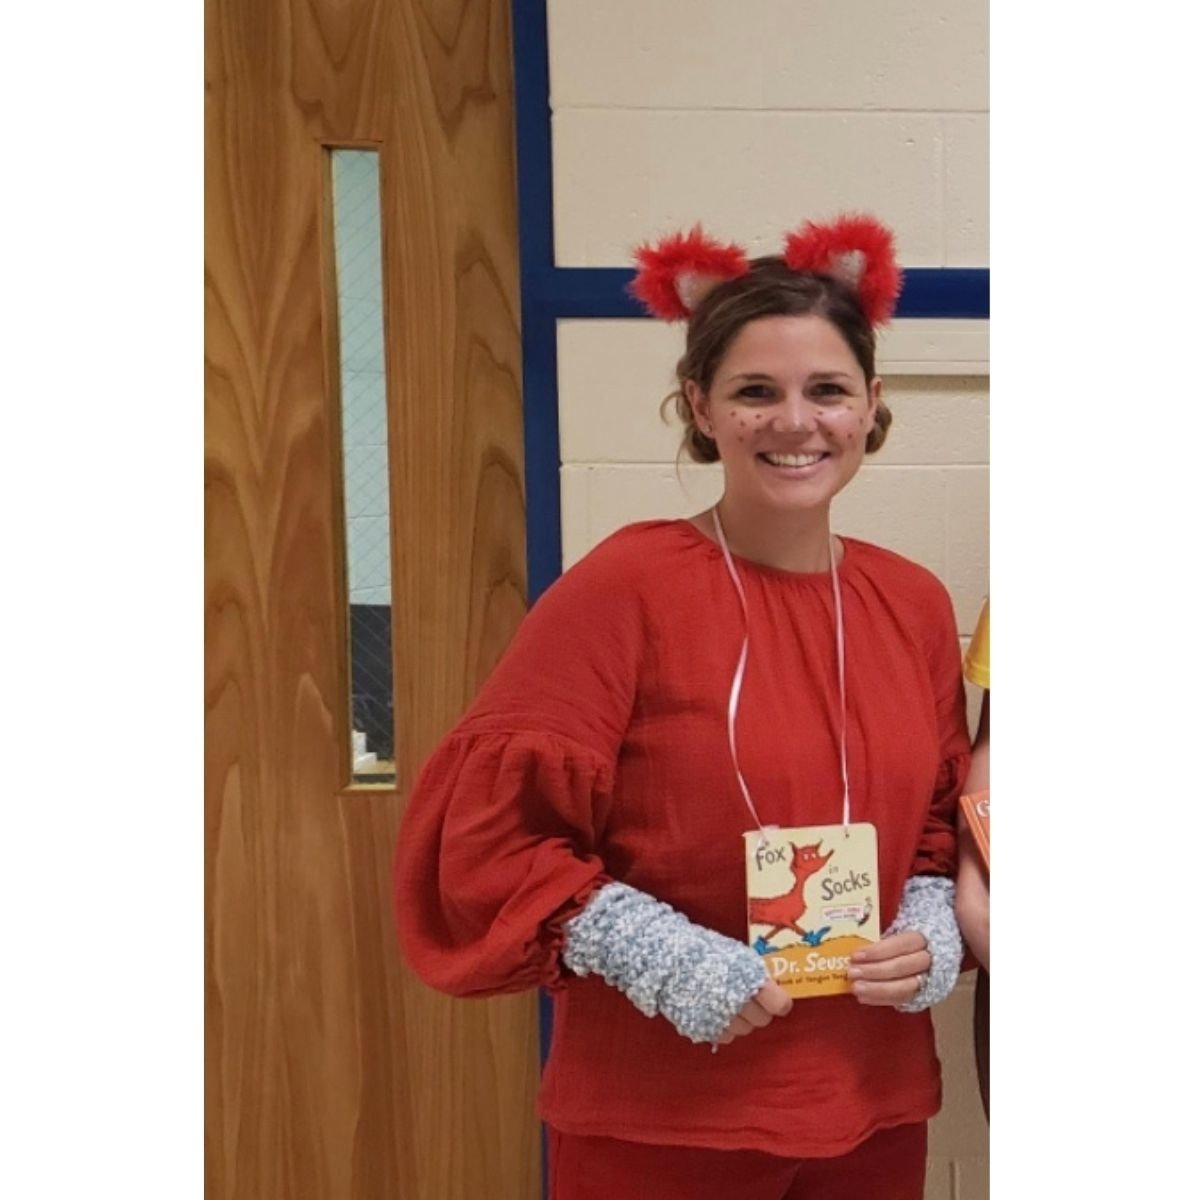 A photograph of Katie dressed in red as Fox in Socks costume for Halloween.